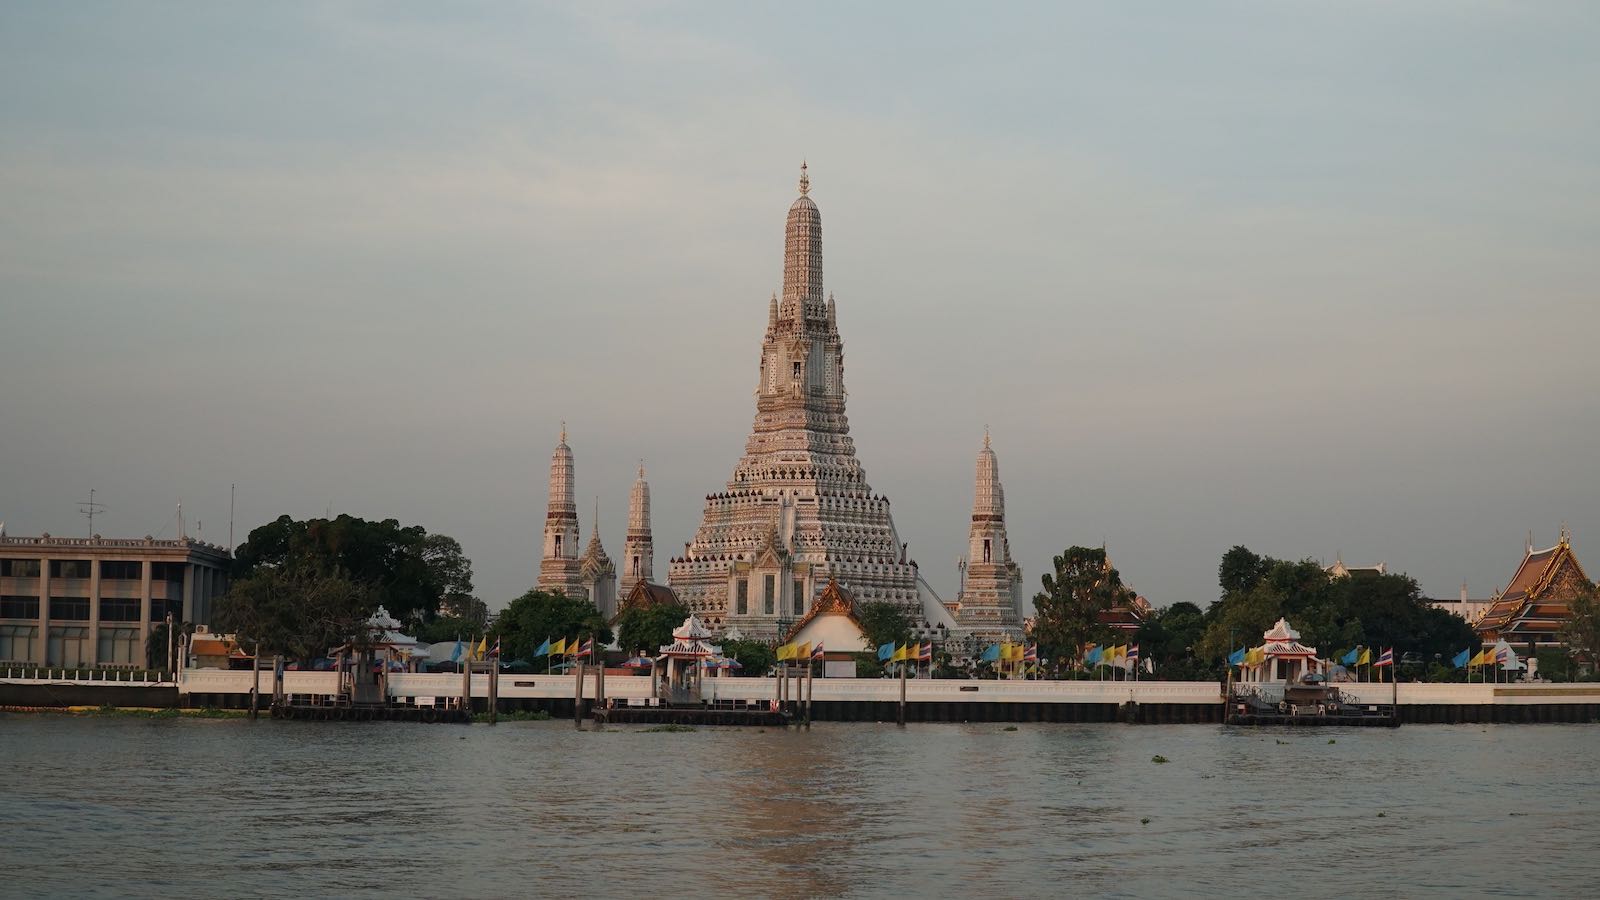 Wat Arun (Temple of Dawn) one of the most recognizable templates in Bangkok. Taking this photo was quite the struggle. The template is situated on the banks of the river. Across the water, the entire opposite bank is lined with residential homes or shops and businesses that weren't open yet. I wanted a shot from across the river and I ran around to find a section of the riverbank that was open to the public but never found it. I wanted to photograph the temple before the sun completely rose and was running out of time looking for a public view. I ended up sneaking into the patio of a boutique coffee shop to take this photo, until the owner came by to open the shop and kicked me out.